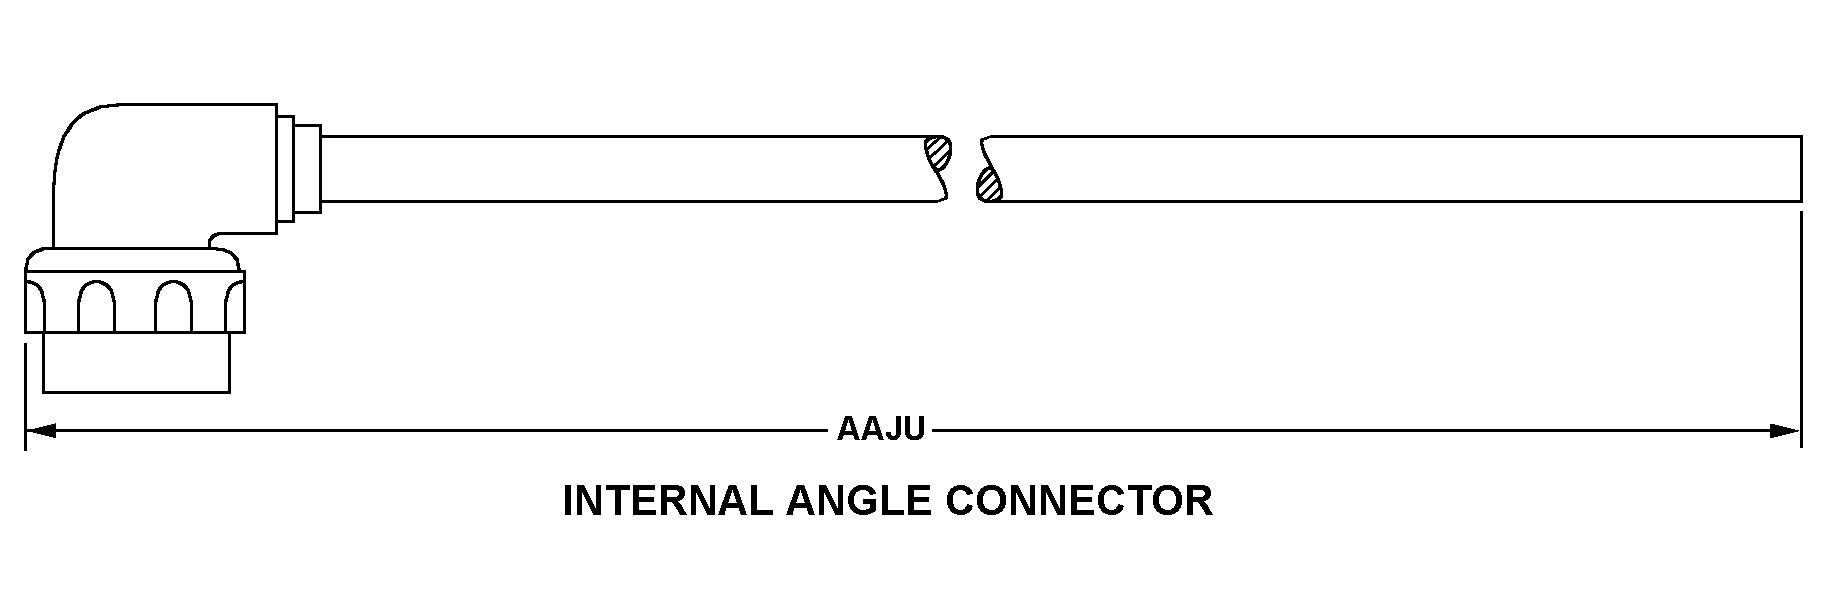 INTERNAL ANGLE CONNECTOR style nsn 6150-01-235-0965